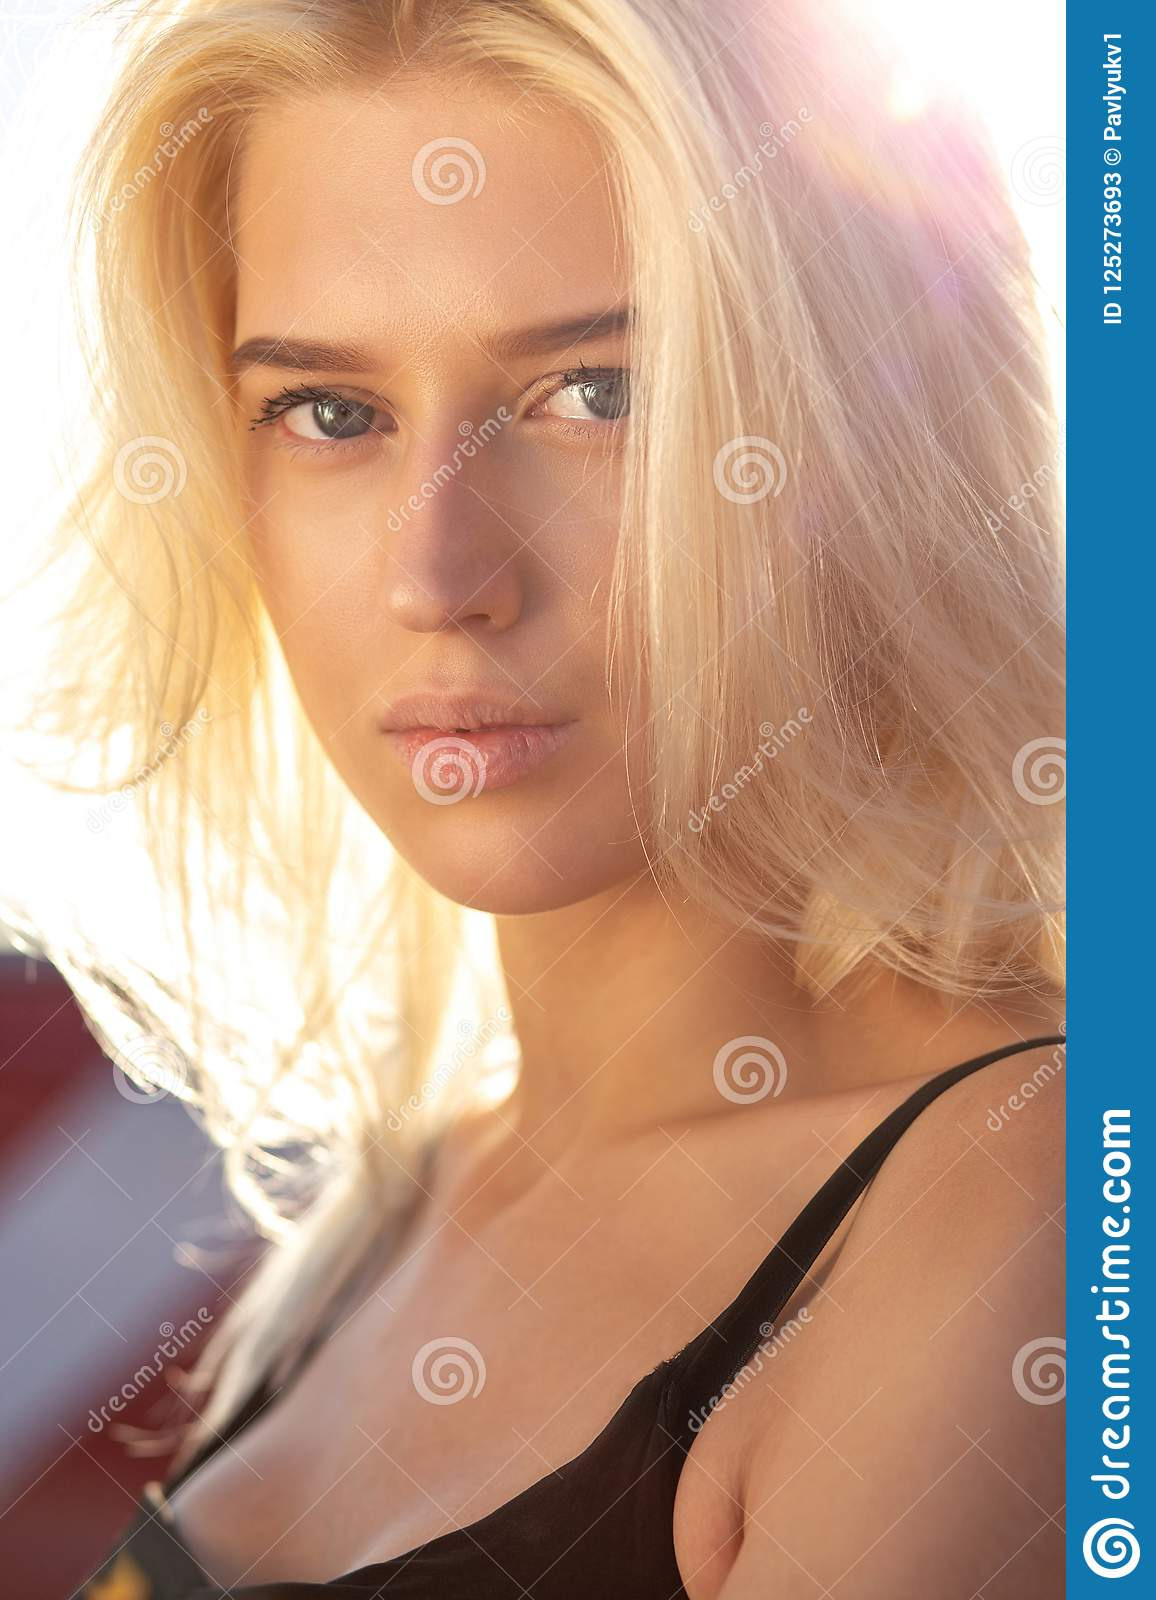 Makeup For Blue Eyes Blonde Hair Tender Blonde Blue Eyed Model With Natural Makeup And Hair Look